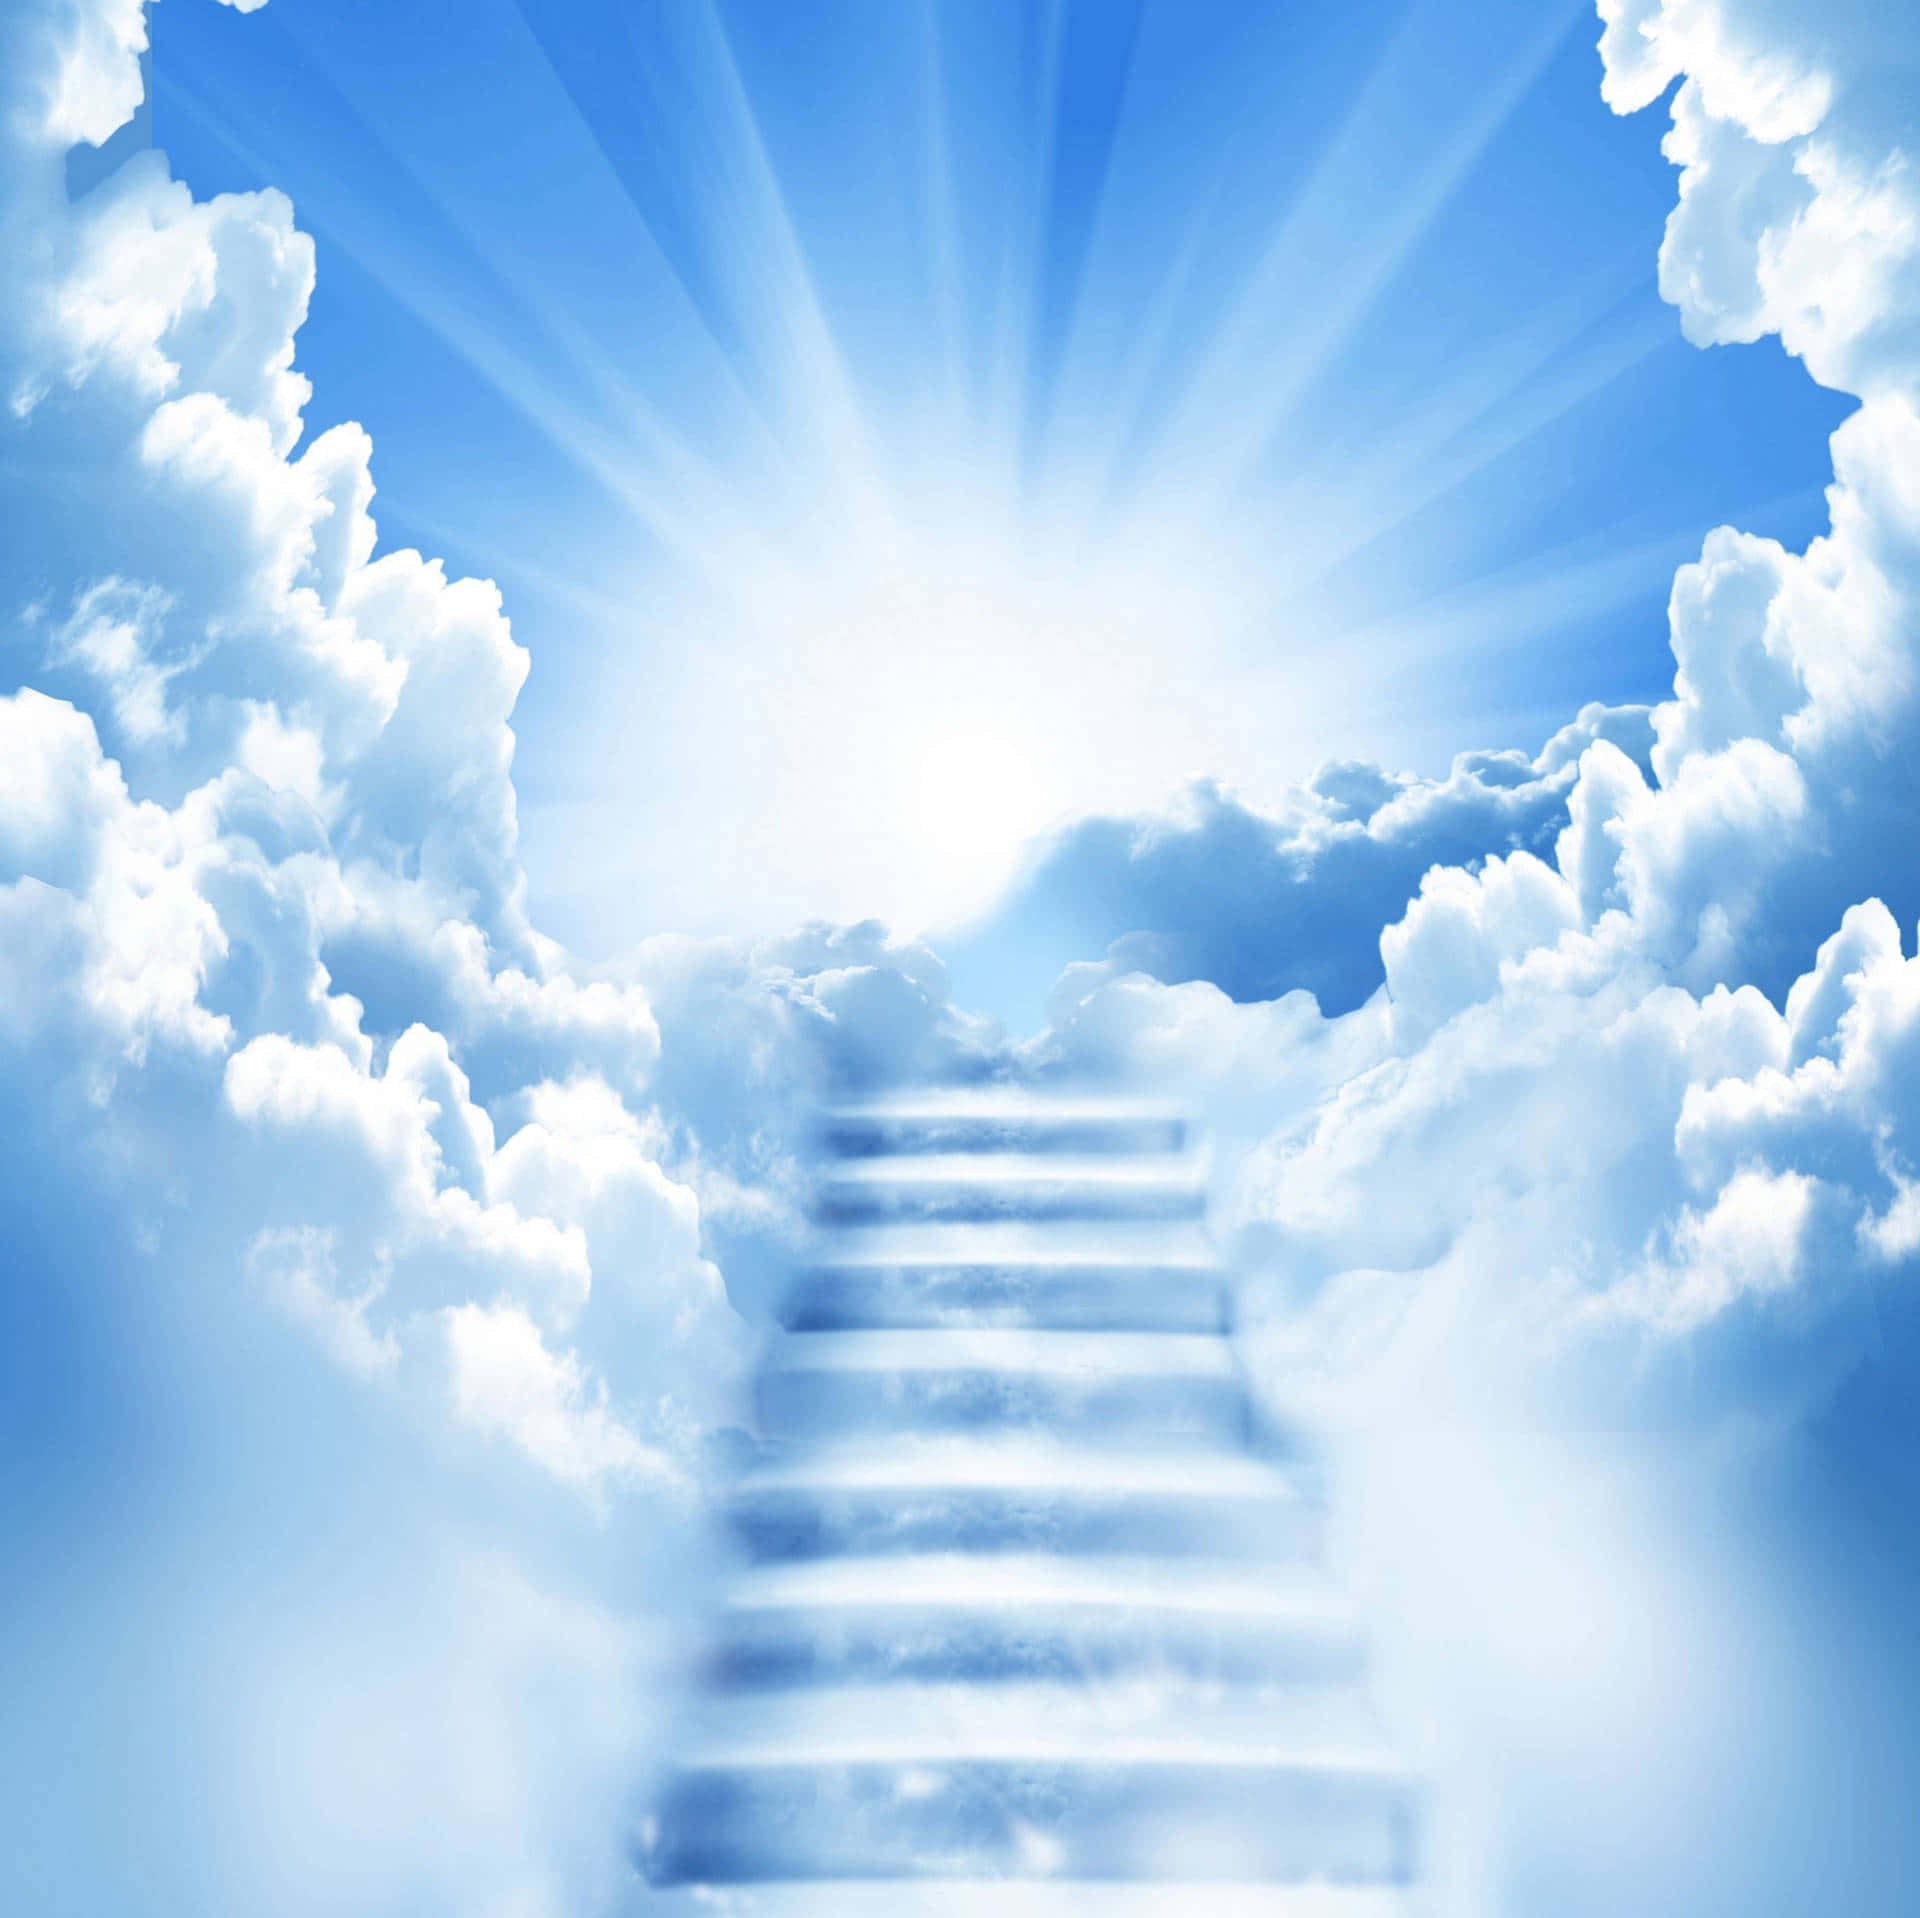 Stairs Mounted On Clouds Heaven Background